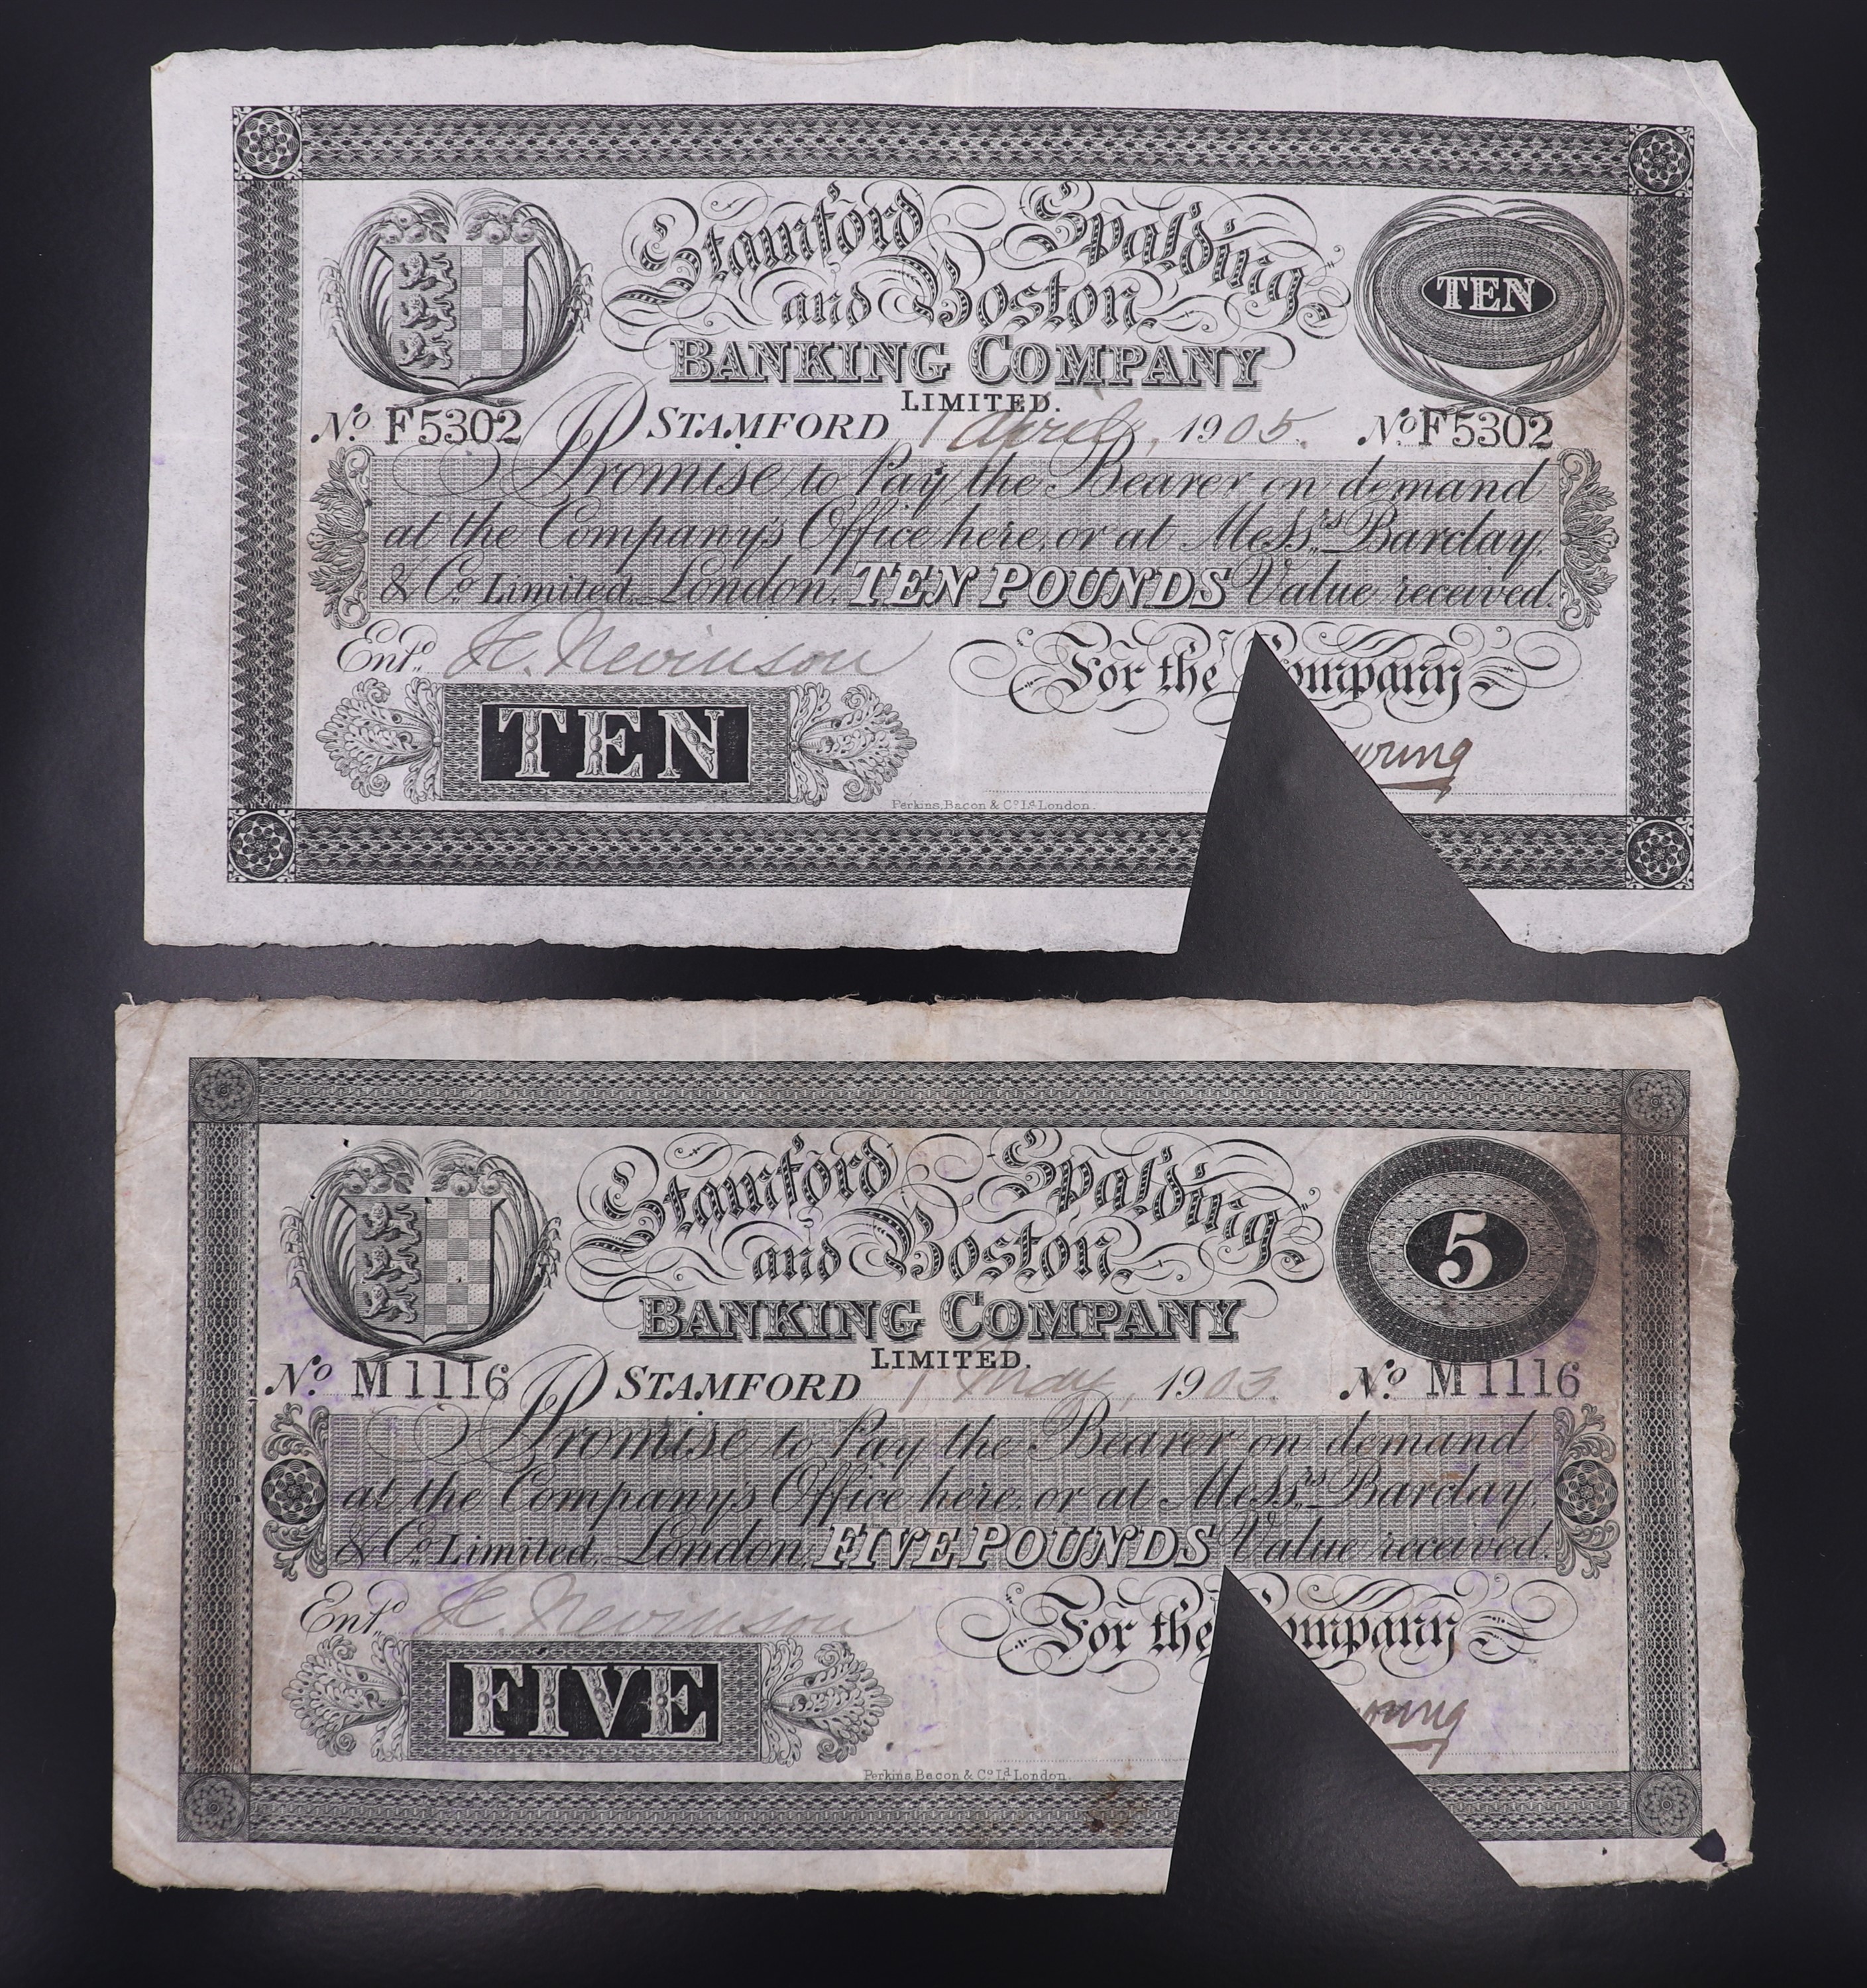 A Stamford Spalding and Boston Banking Company Ltd ten pound provincial banknote together with